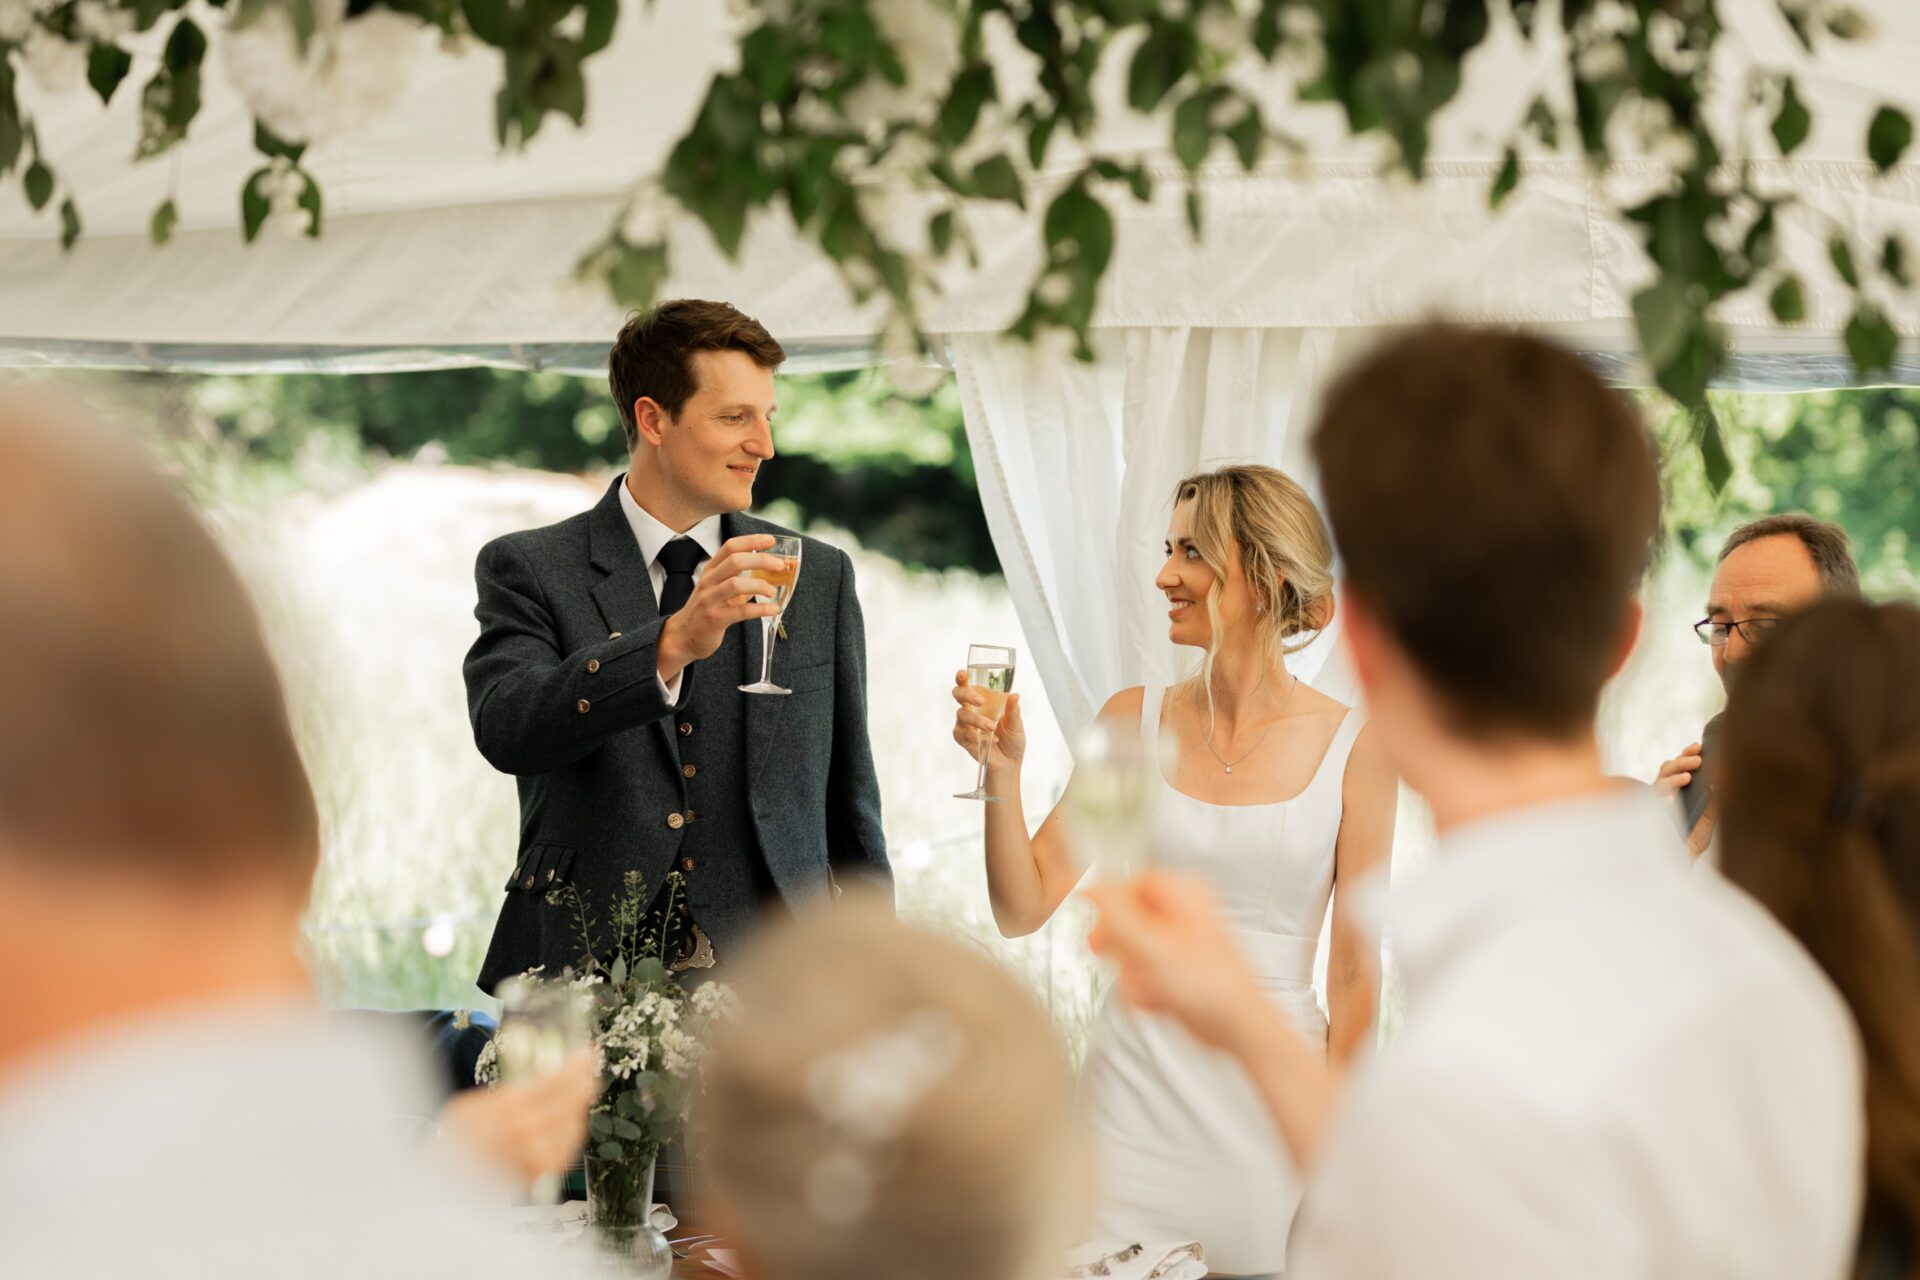 The bride and groom share a toast at their Devon marquee wedding